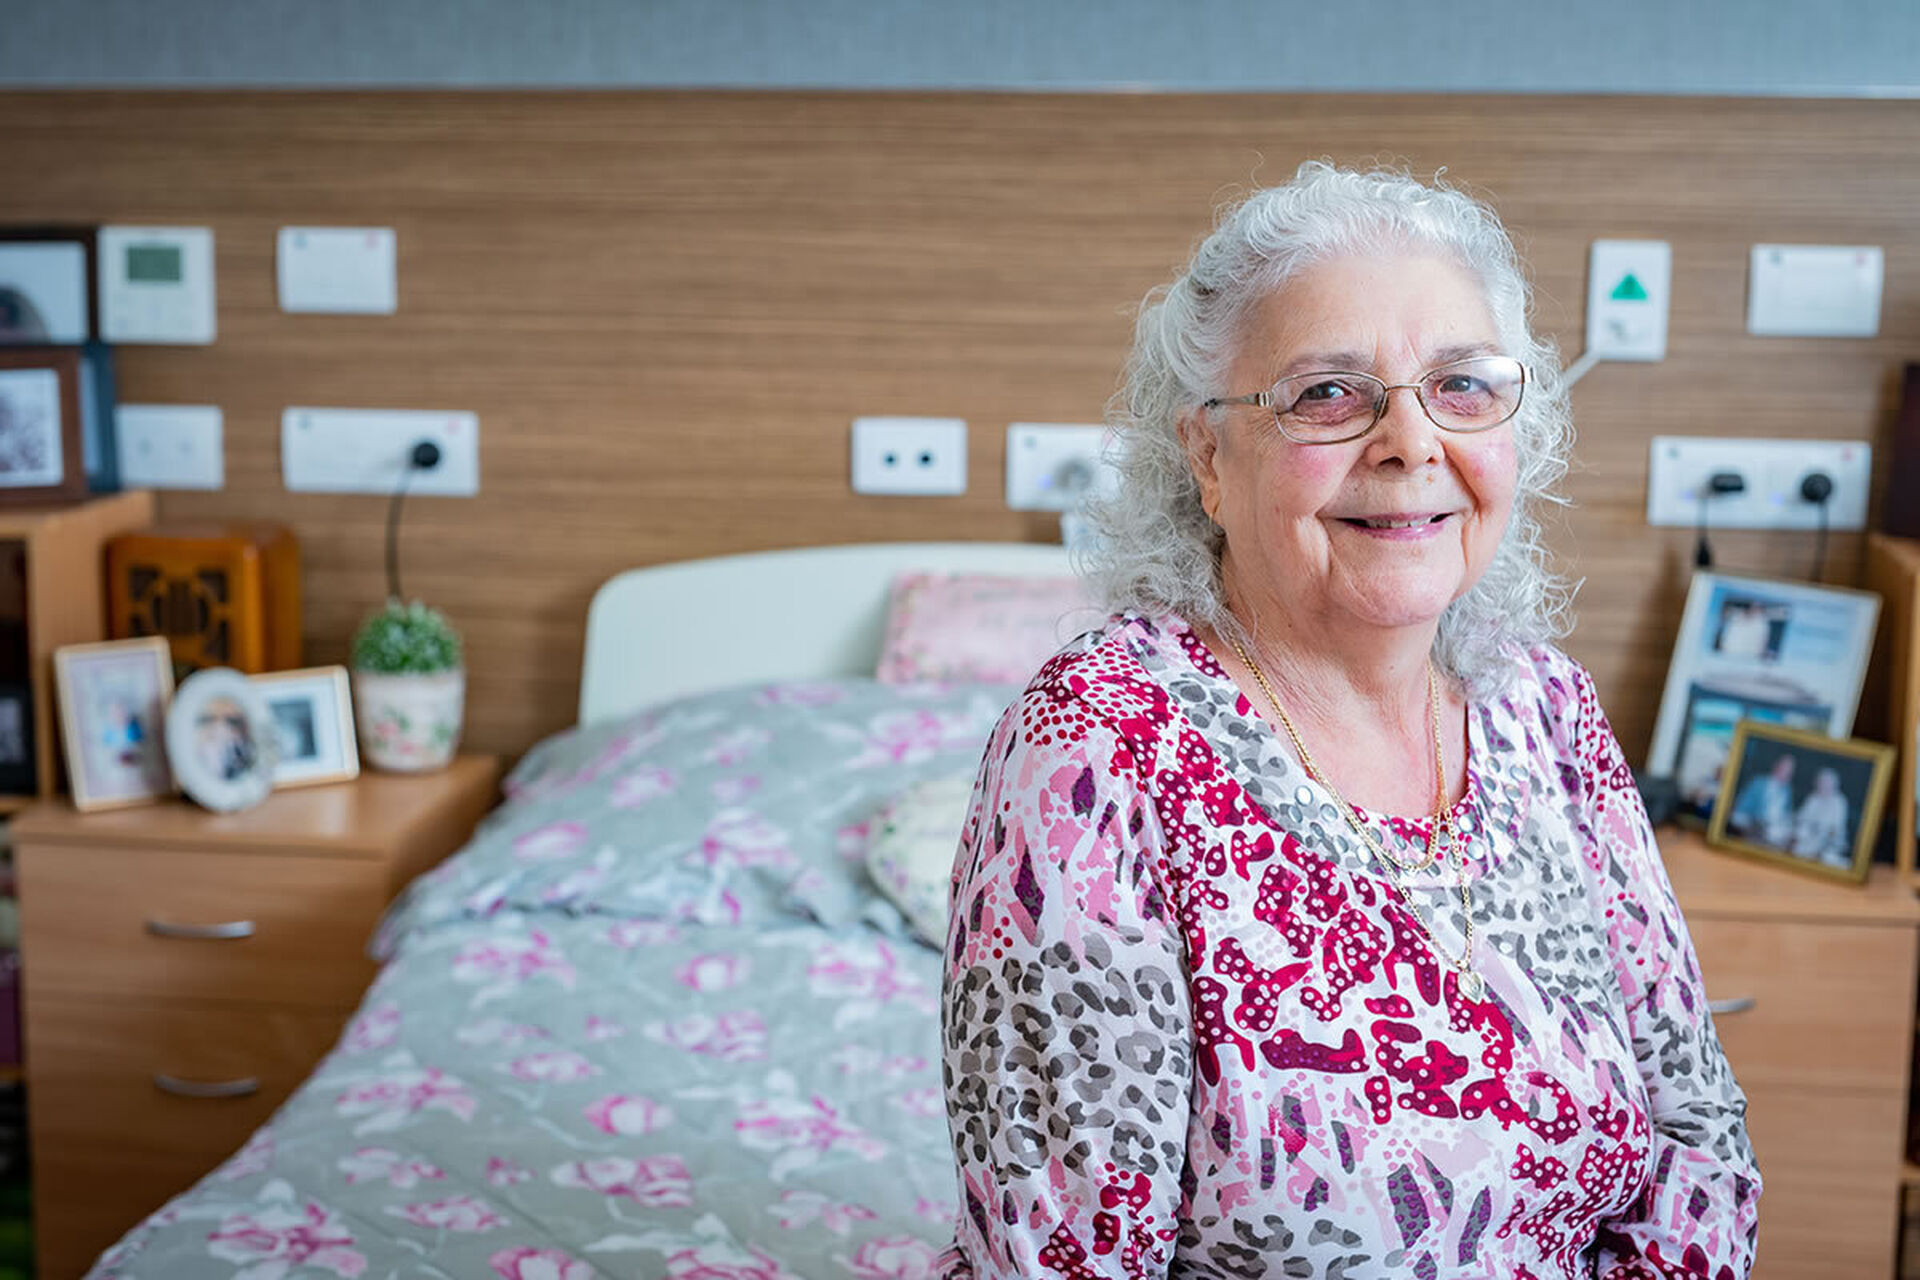 a nursing home smiling resident enjoying life at baptistcare graceford aged care home in byford wa